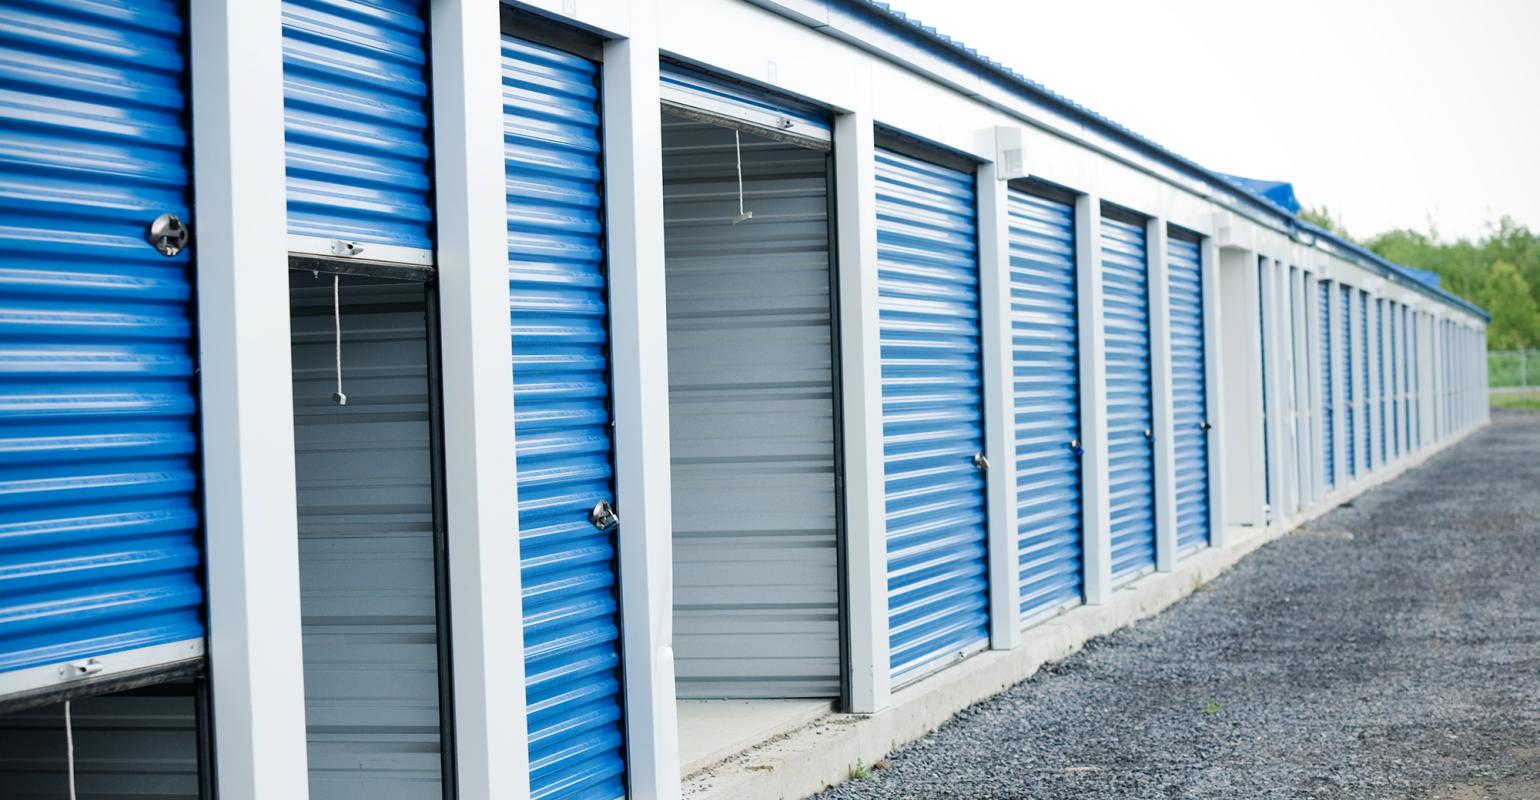 Why self-storage pricing is on the rise